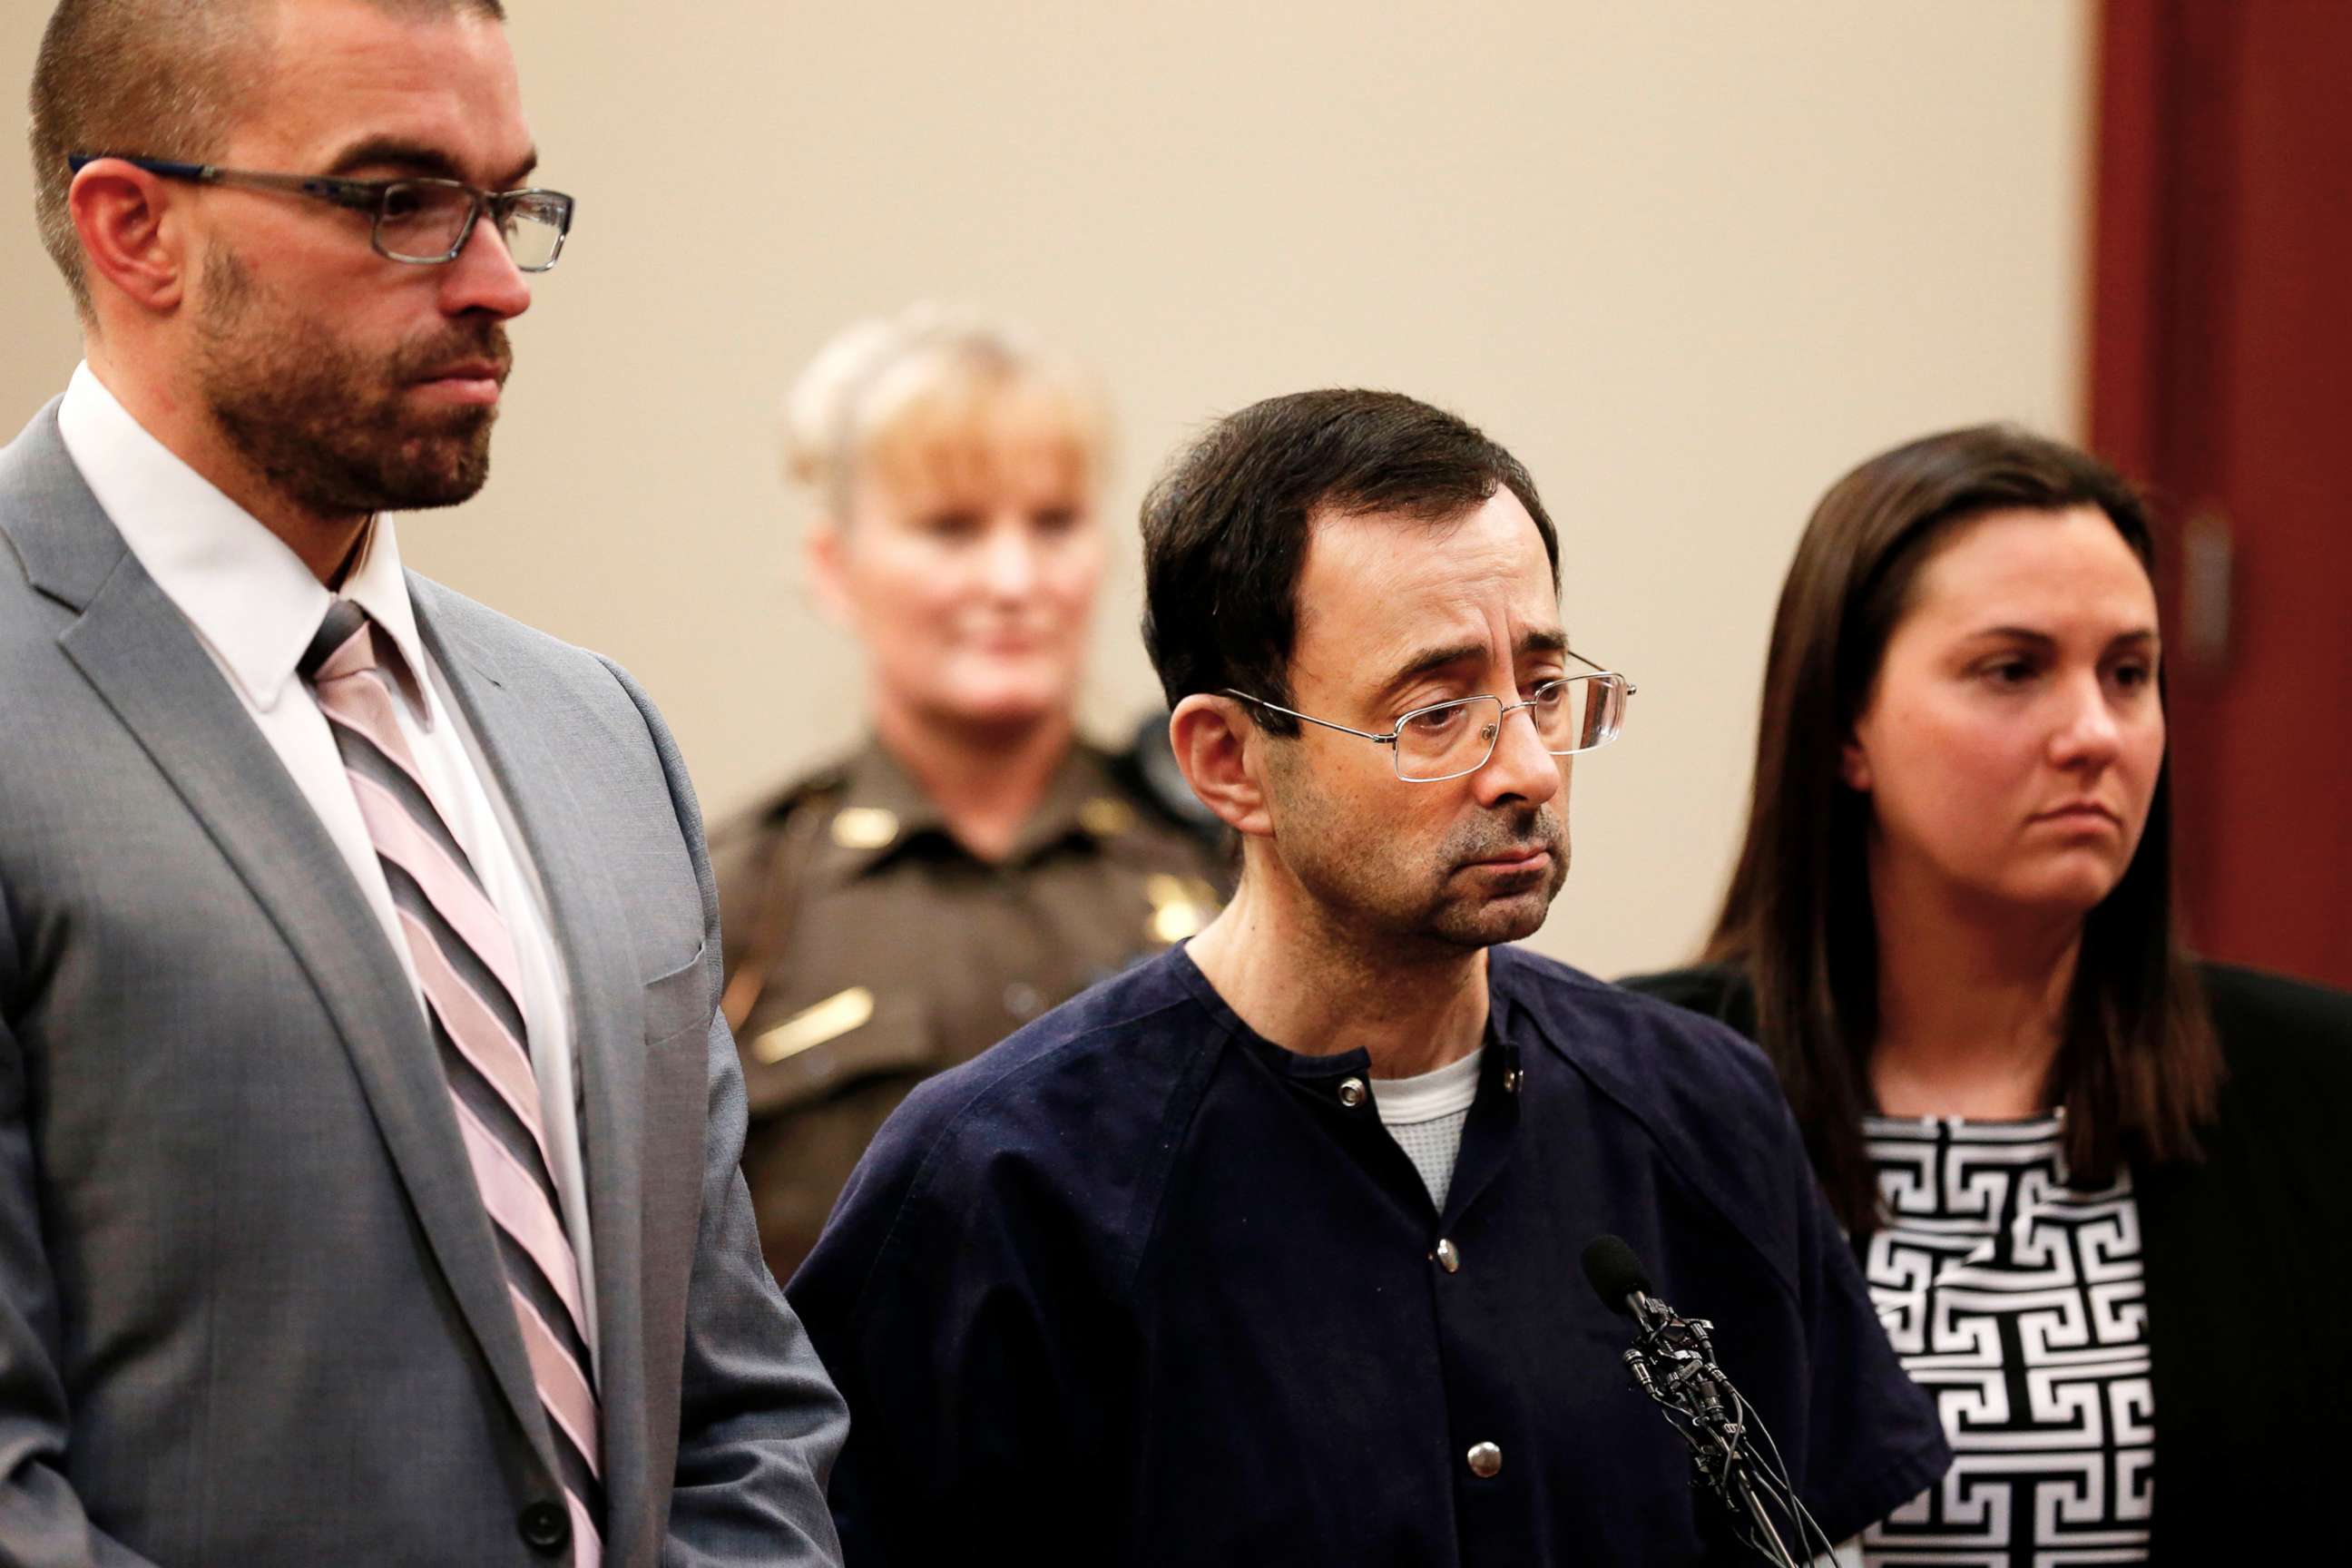 PHOTO: Former Michigan State University and USA Gymnastics doctor Larry Nassar (C) with defense attorneys  Matt Newberg (L) and Molly Blythe (R) during the sentencing phase in Ingham County Circuit Court on Jan. 4, 2018 in Lansing, Mich.